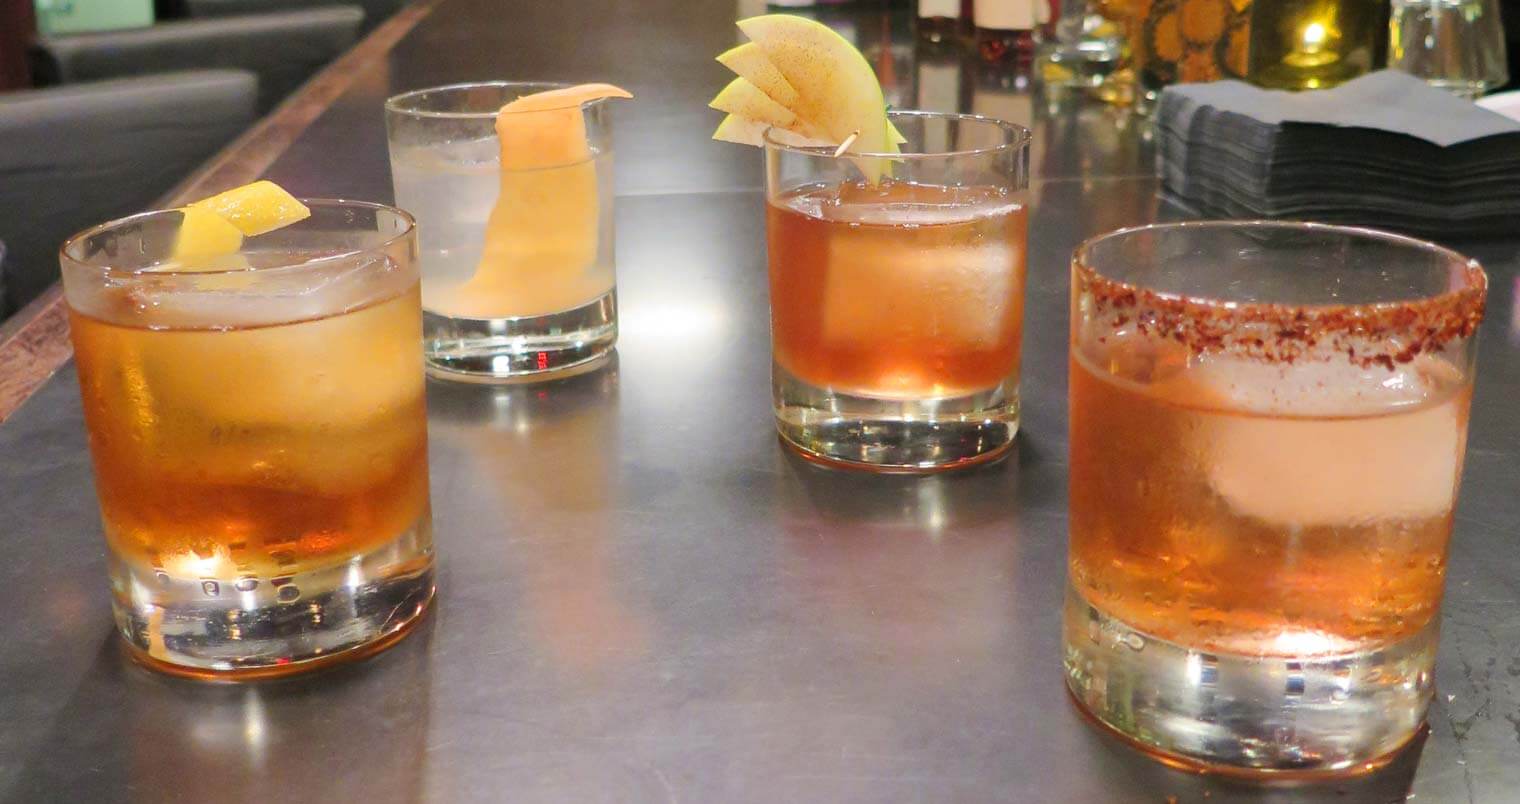 4 “New” Old Fashioned Cocktails